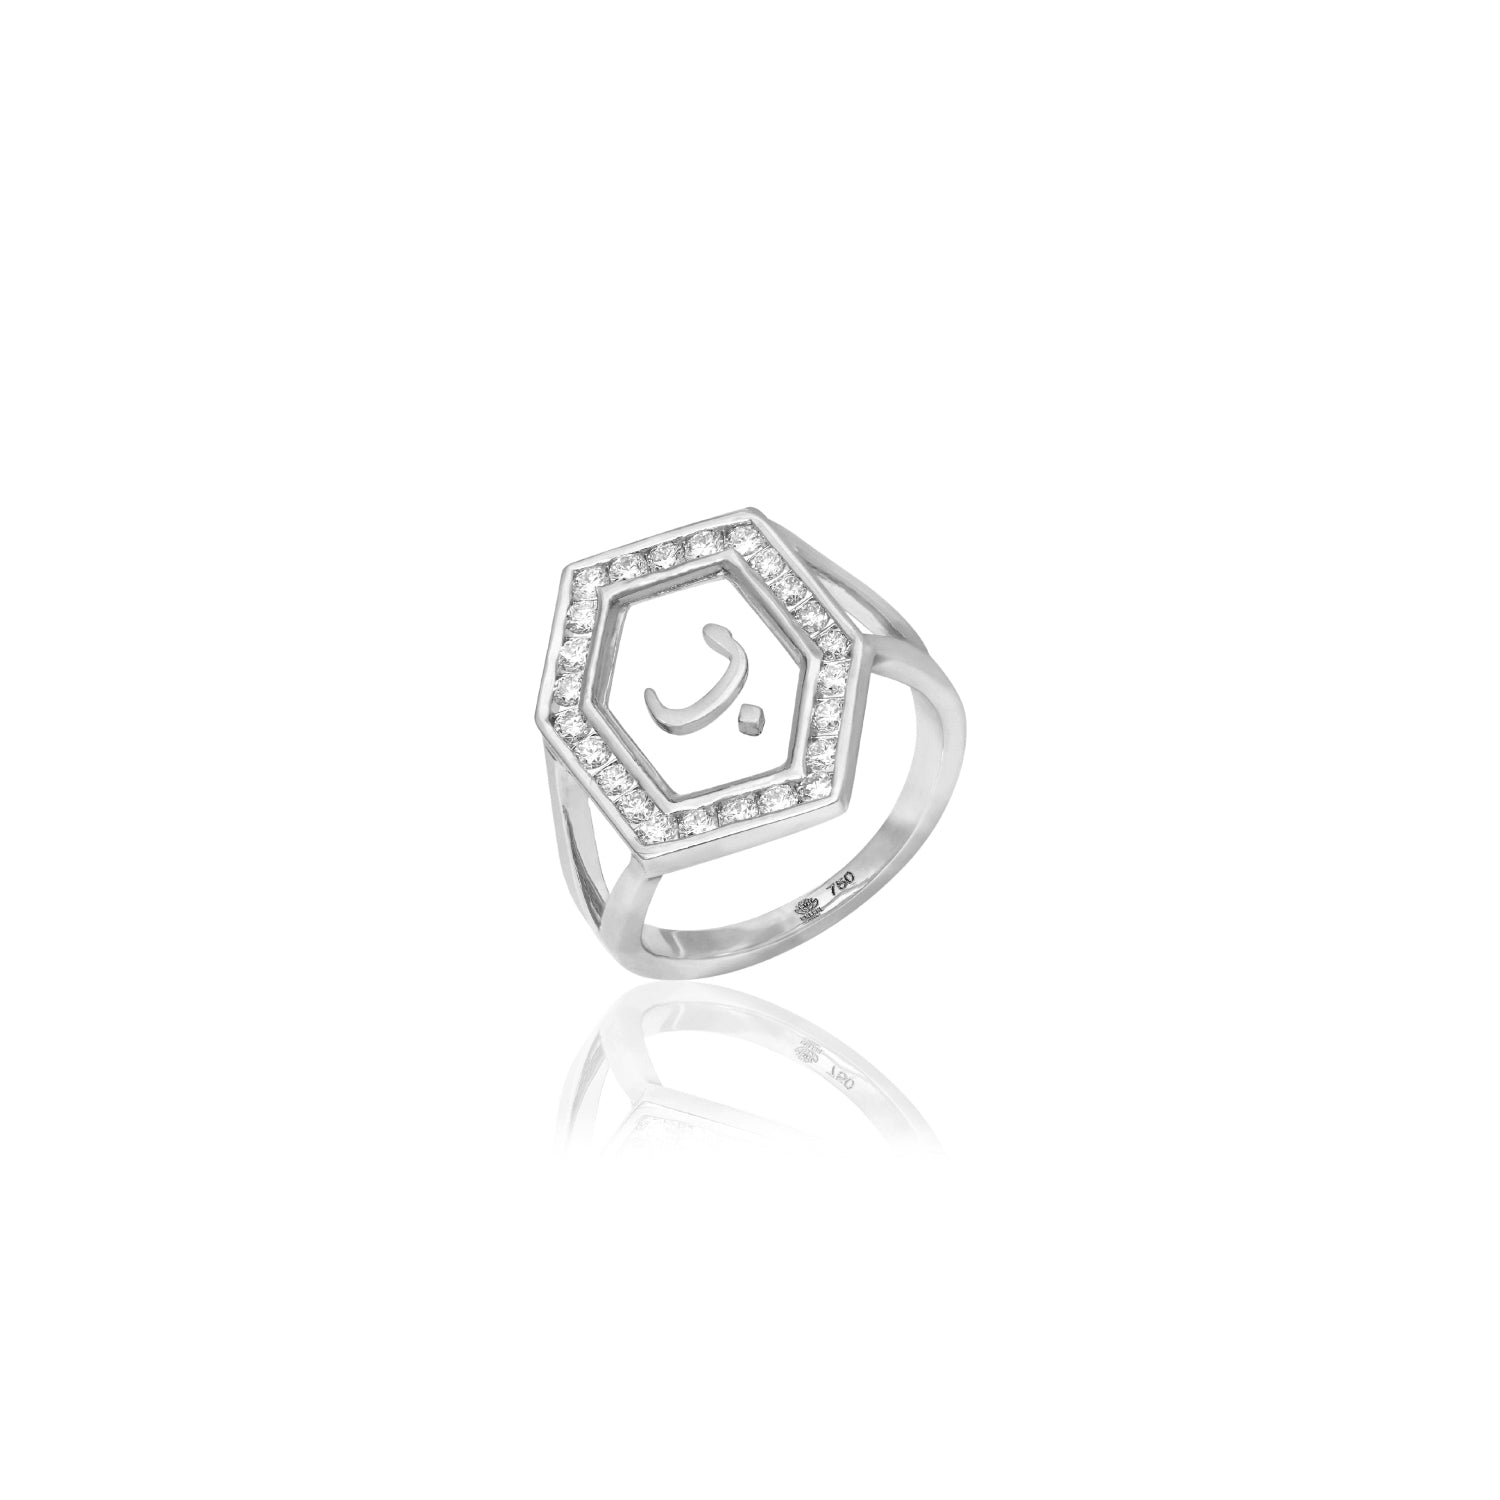 Qamoos 1.0 Letter ب Diamond Ring in White Gold